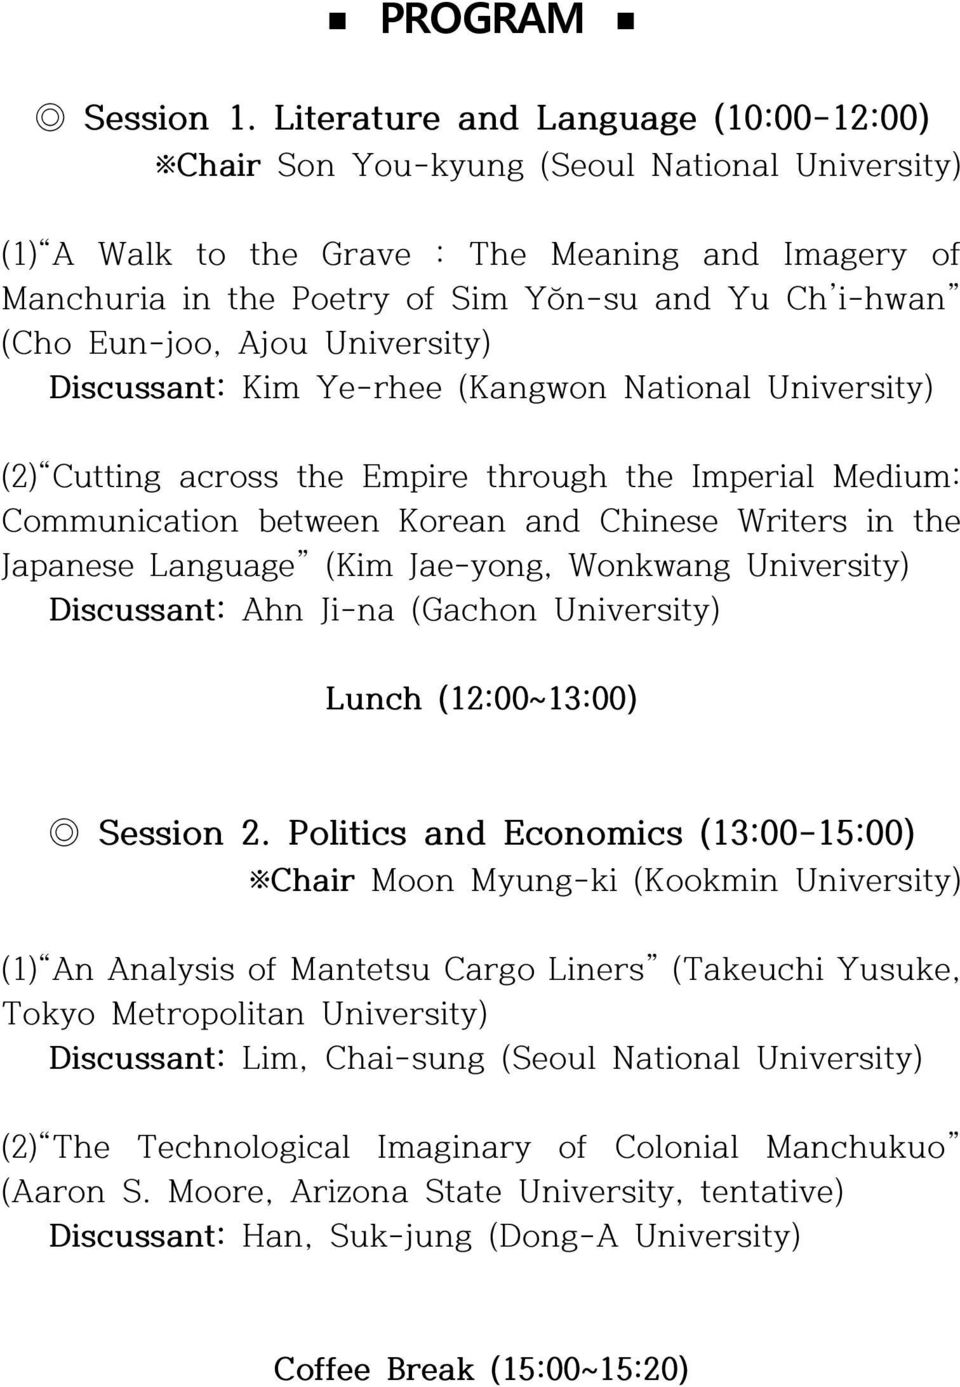 Eun-joo, Ajou University) Discussant: Kim Ye-rhee (Kangwon National University) (2) Cutting across the Empire through the Imperial Medium: Communication between Korean and Chinese Writers in the